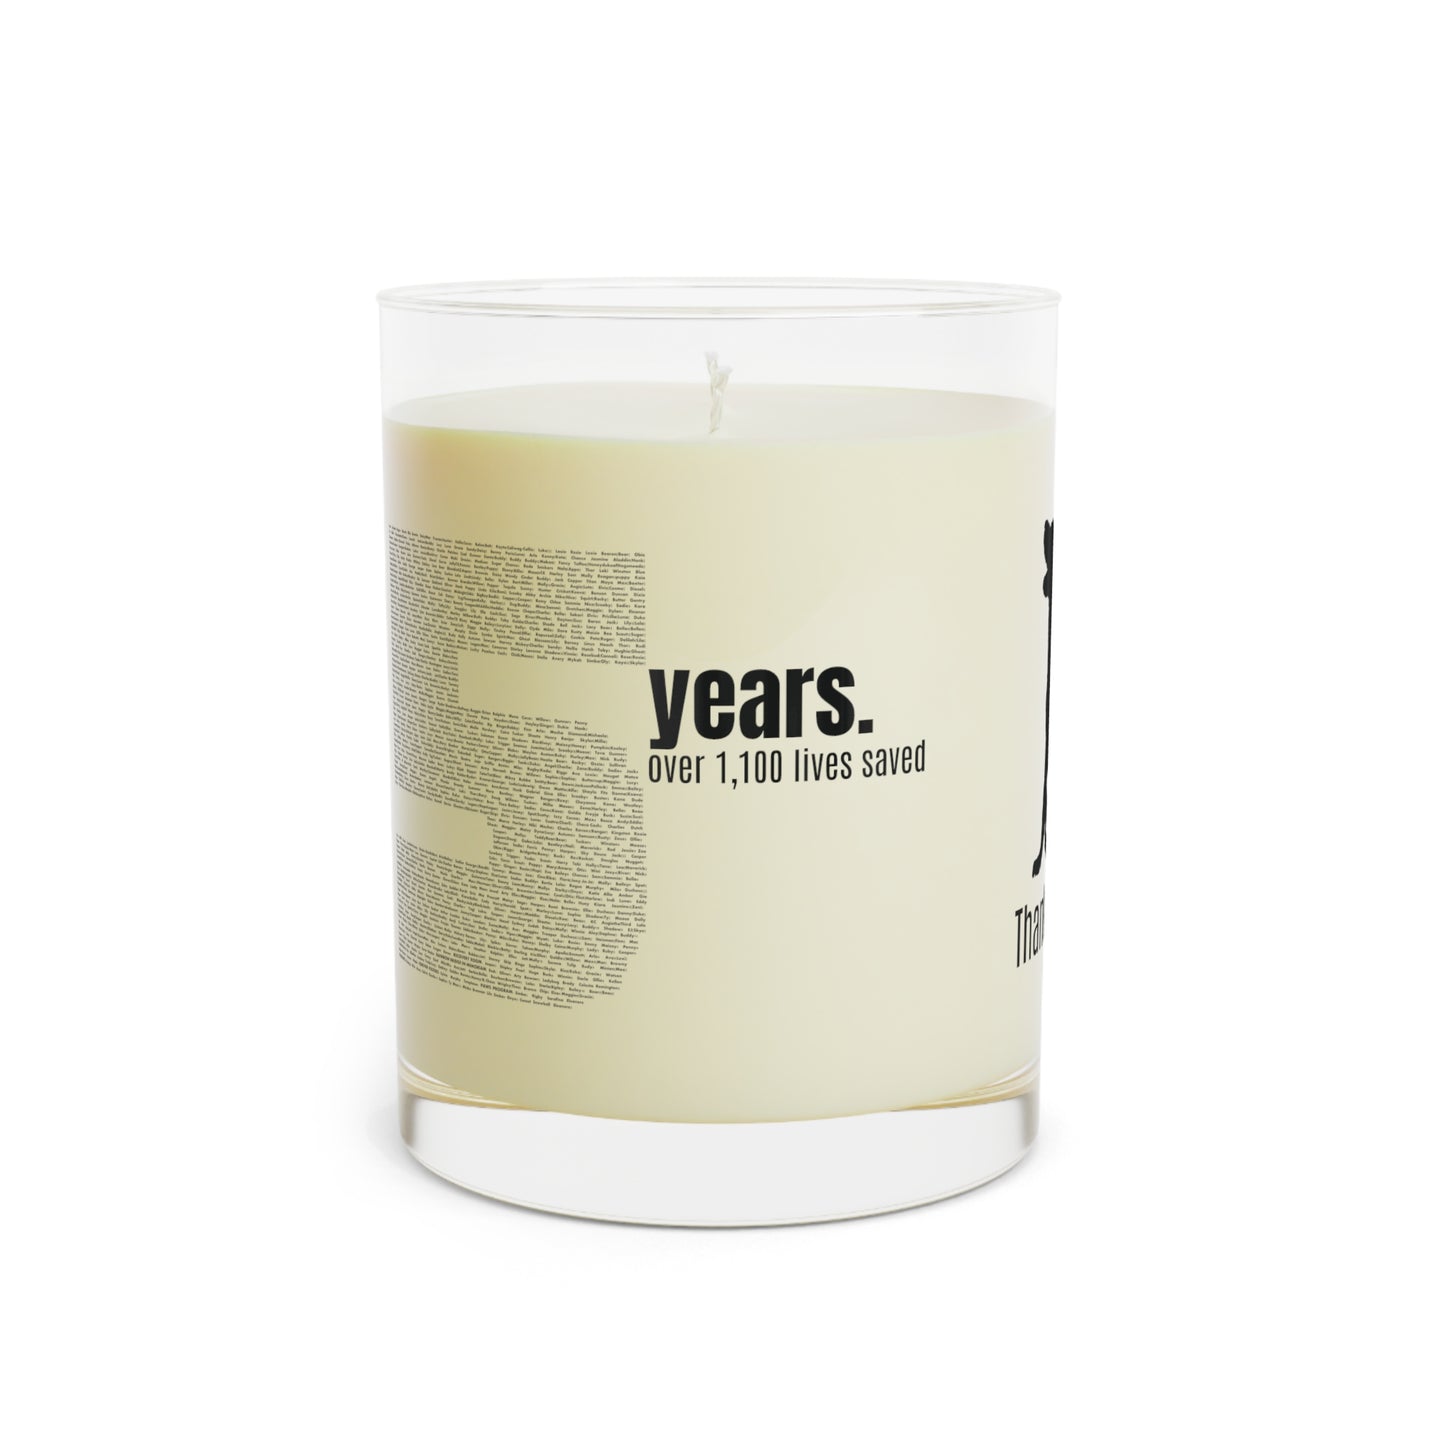 SOLR 5 year for Susan - Scented Candle - Full Glass, 11oz